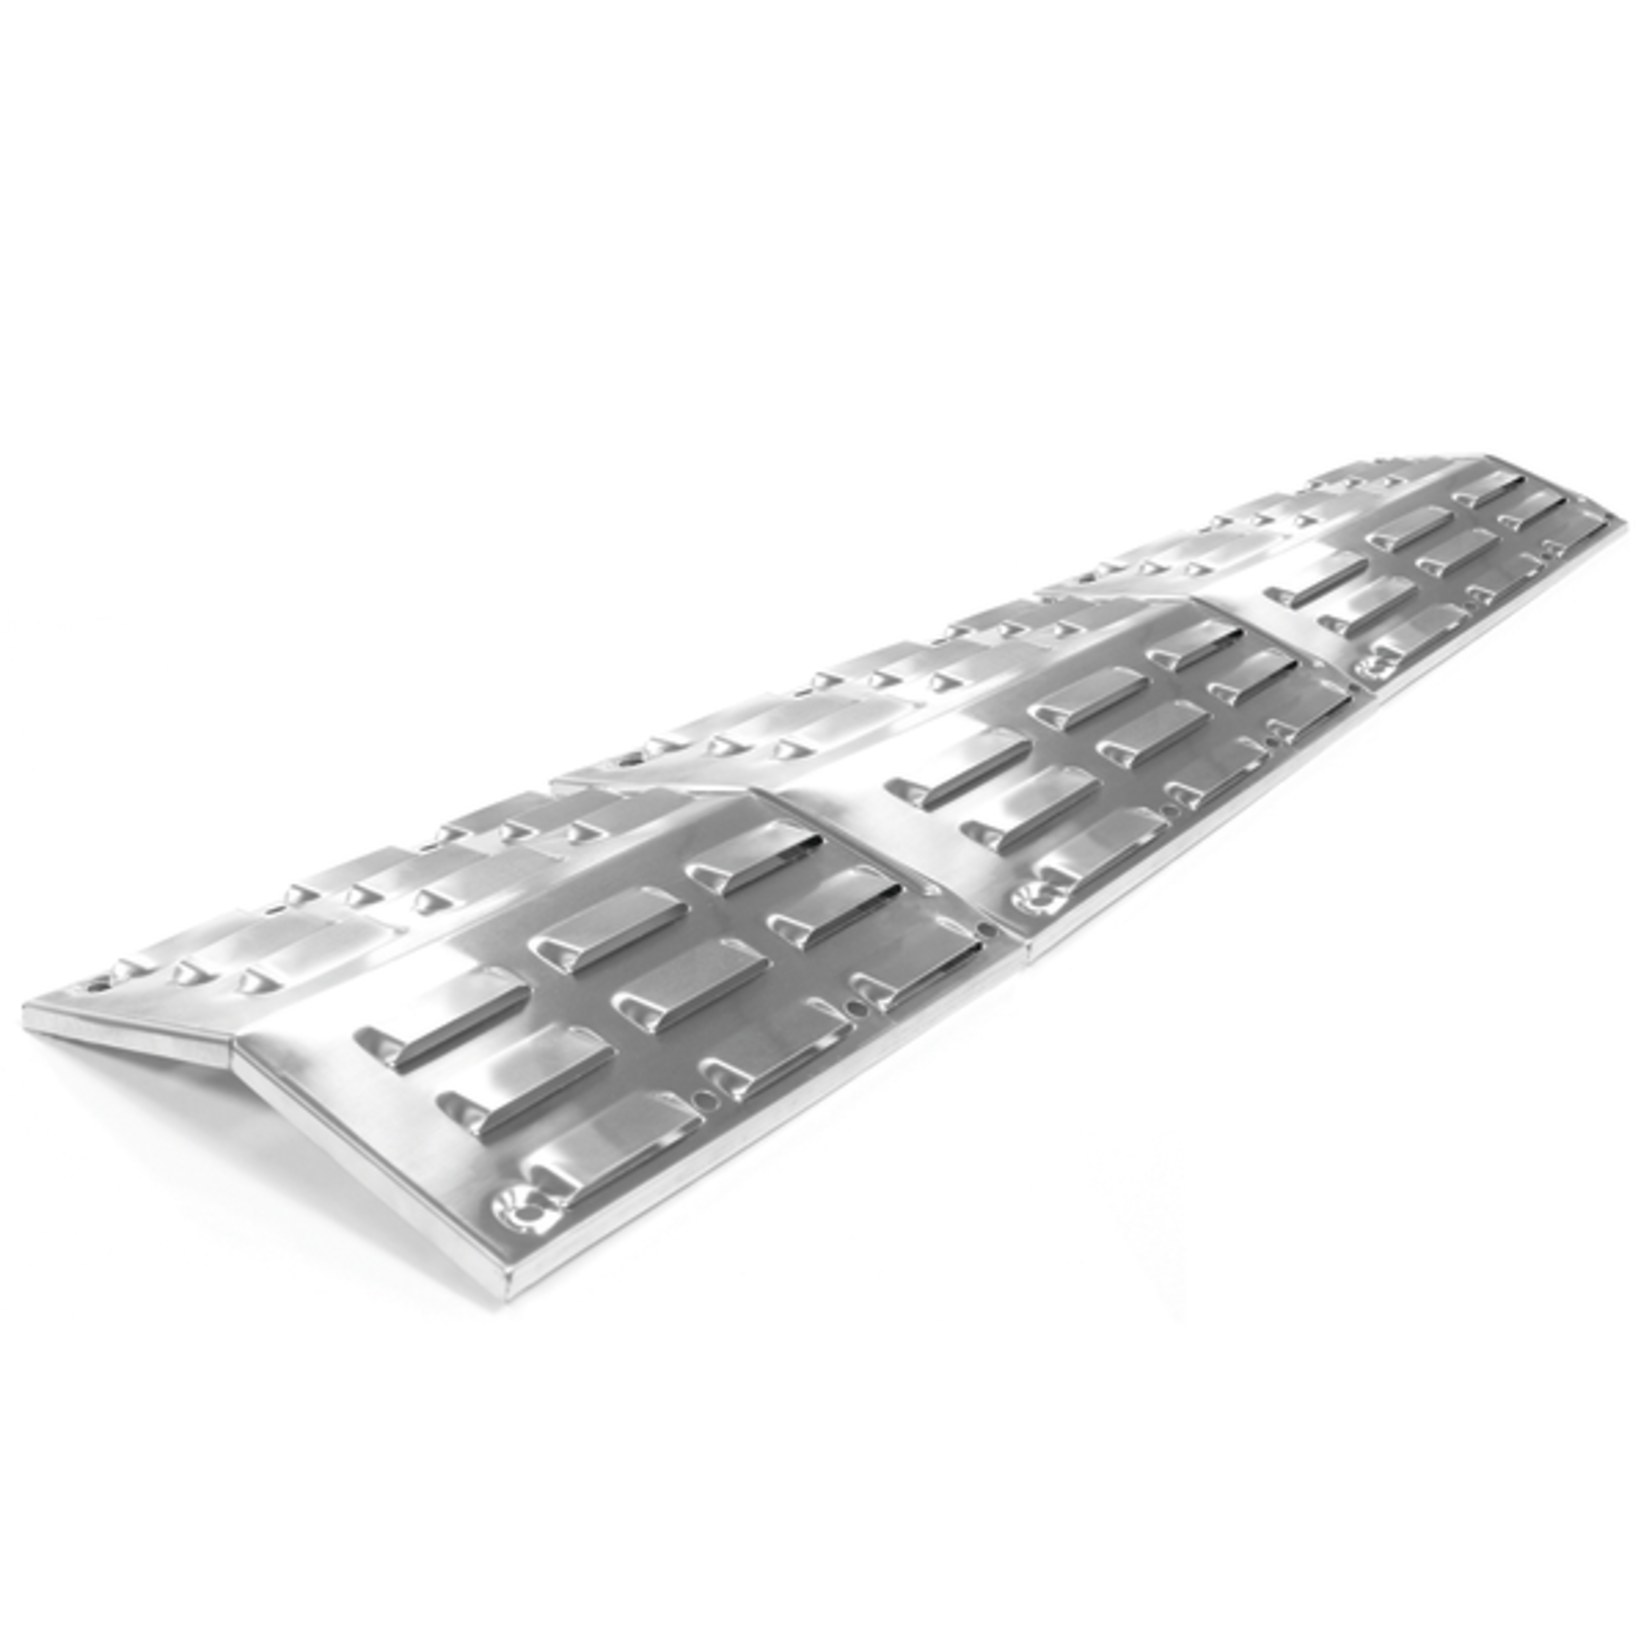 Broil King Universal Stainless Heat Plates